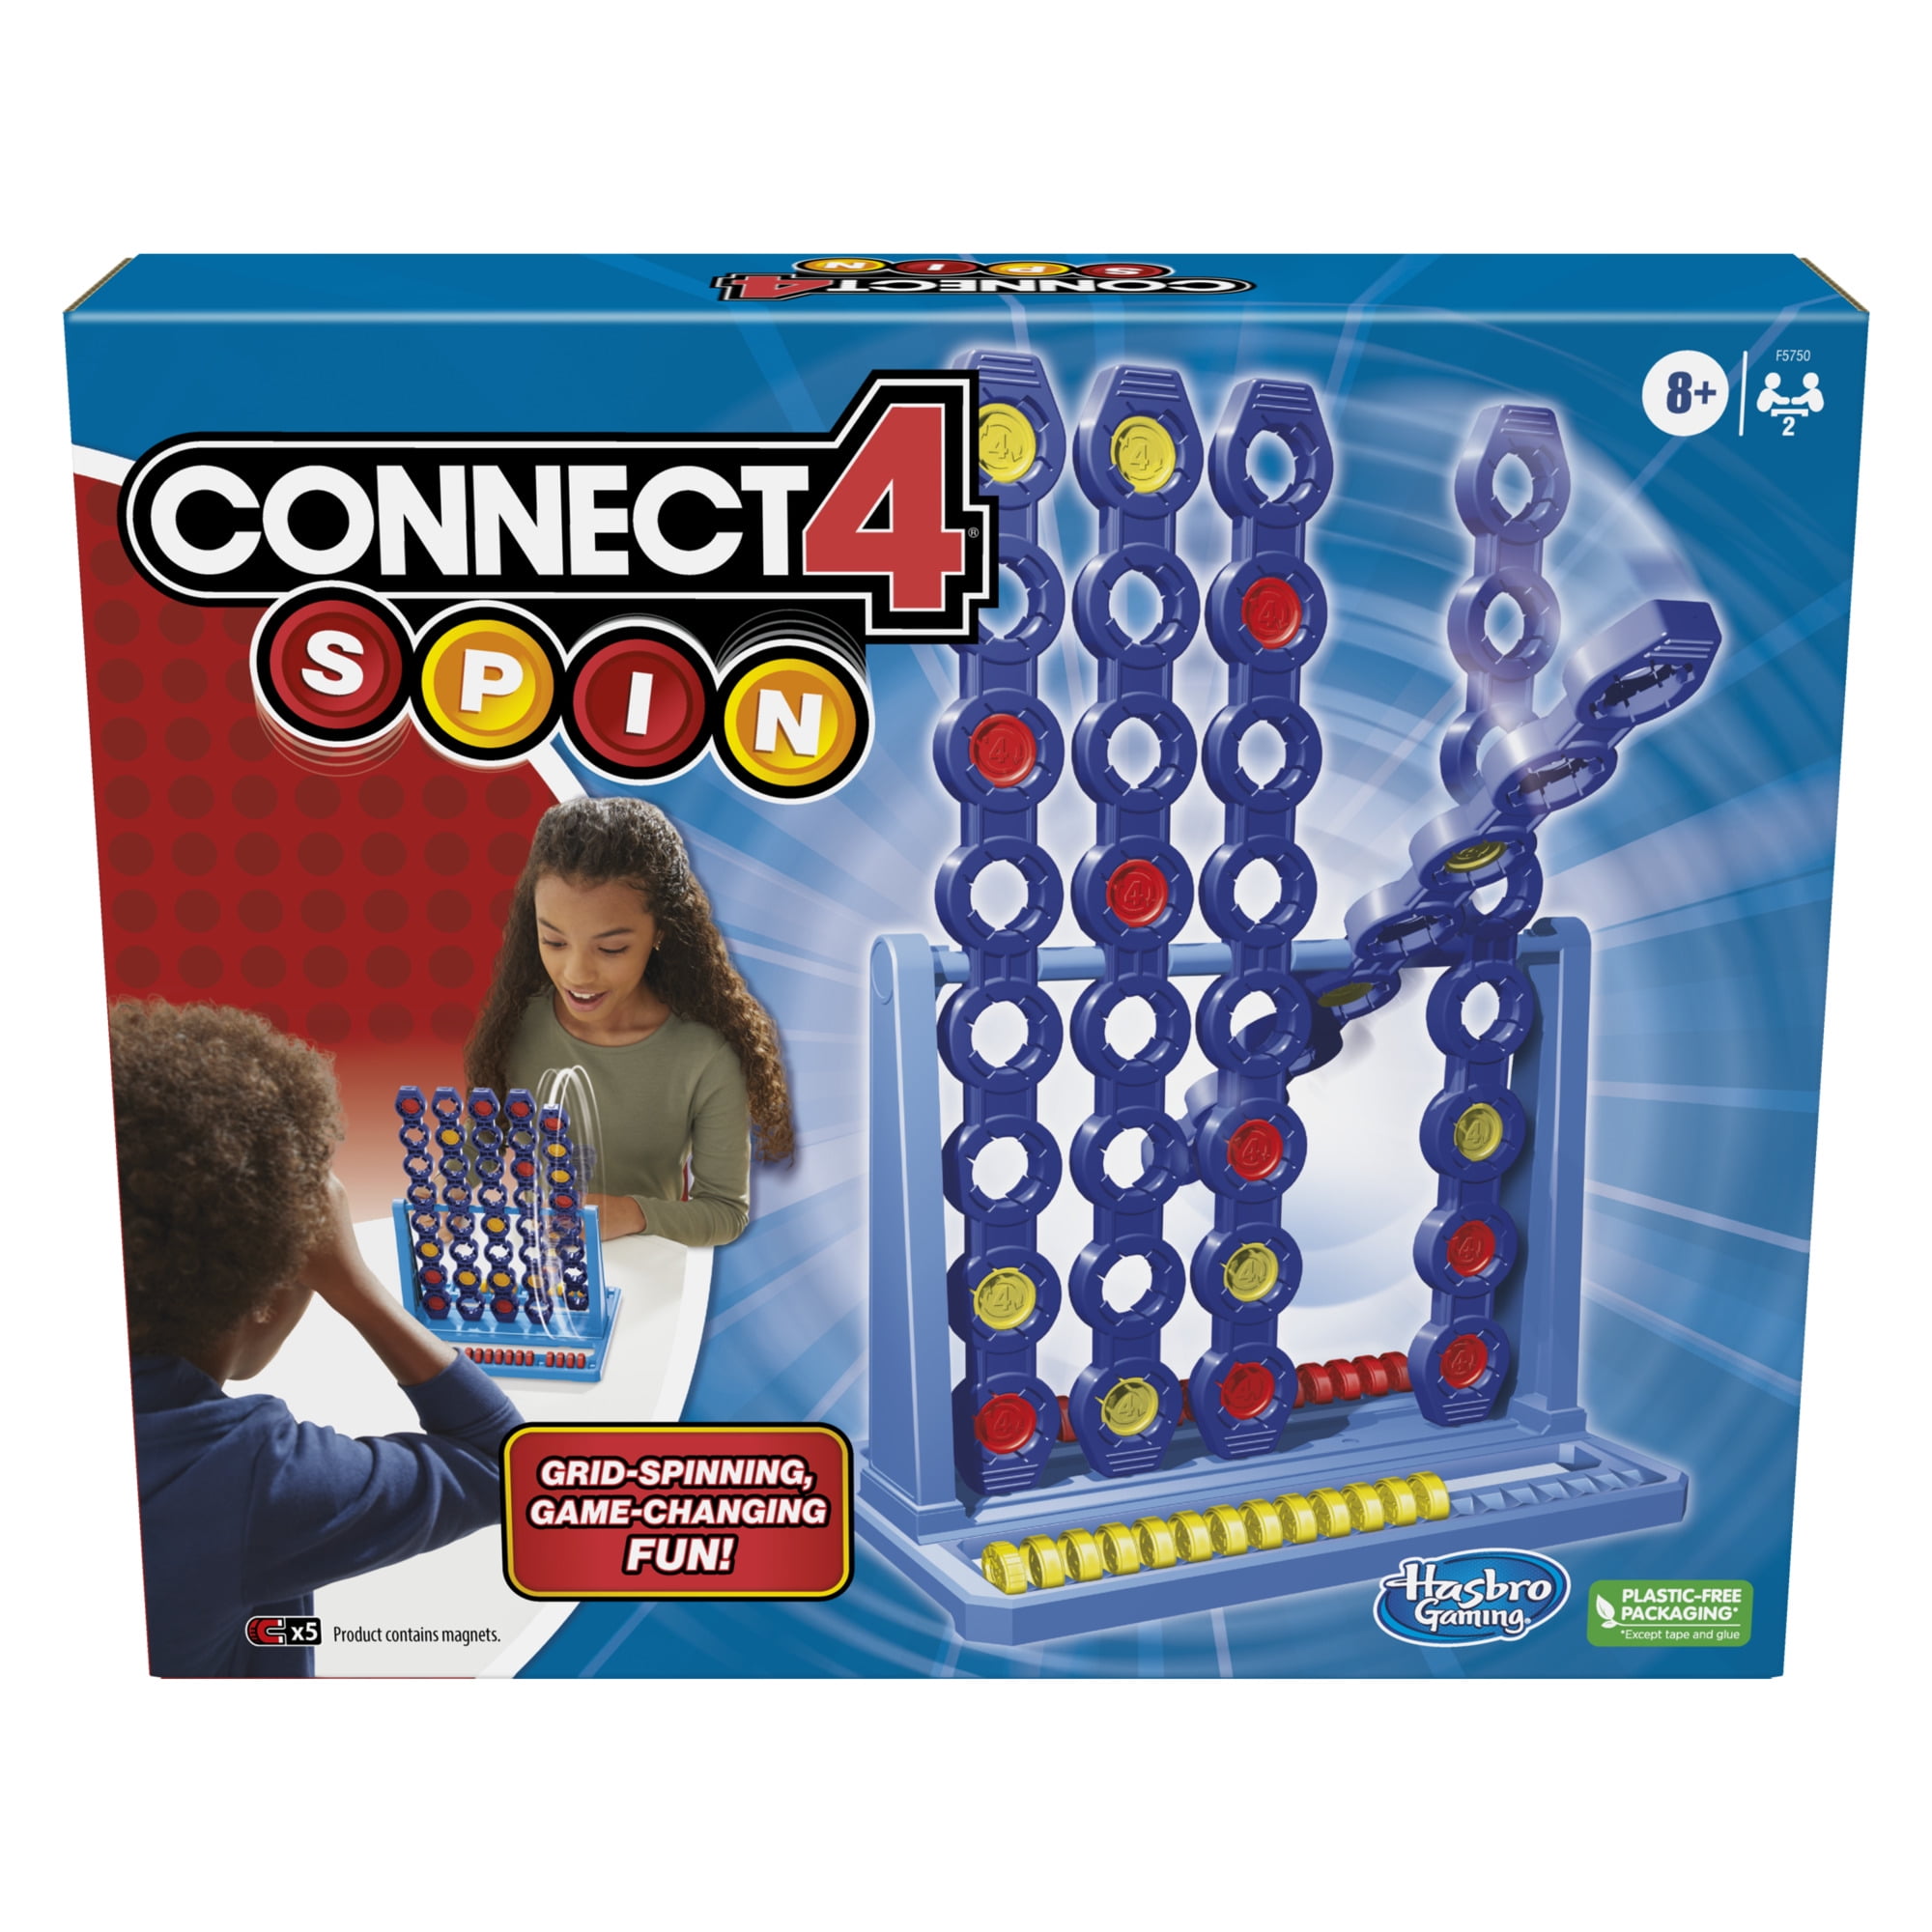 Connect 4 Spin Game, Features Spinning Connect 4 Grid, Board Game for Kids and Family